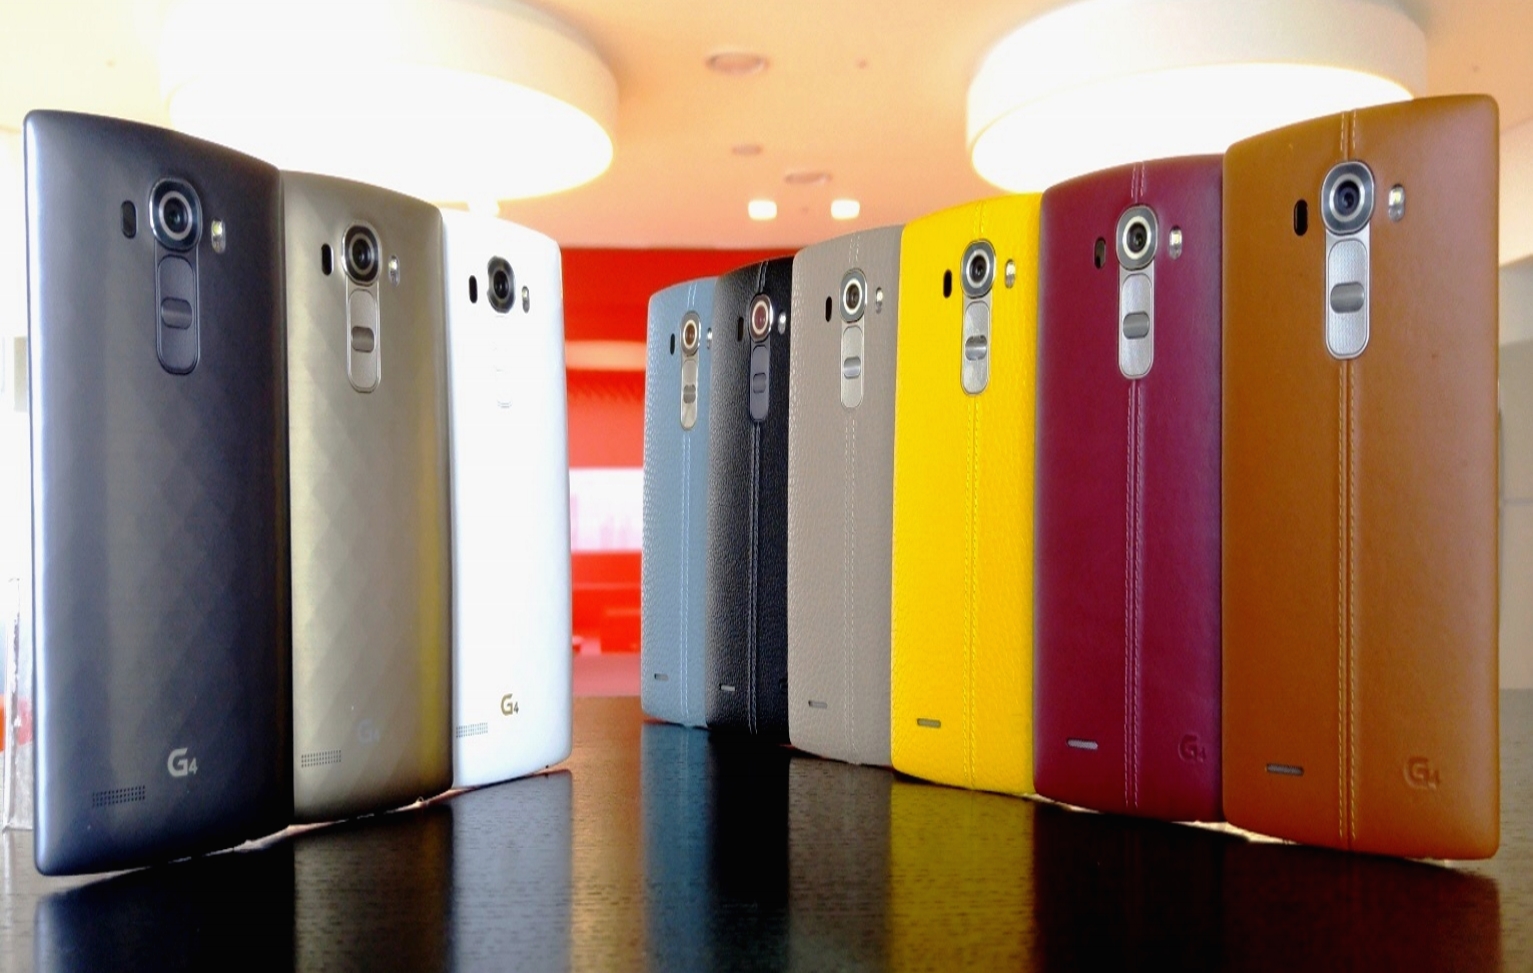 LG G4 handsets wearing three unique material covers in three colors(Metallic Gray, Shiny Gold, Ceramic White) with 3D patterns and handcrafted, genuine full grain leather back cover in six colors(Sky Blue, Black, Beige, Yellow, Red, Brown)